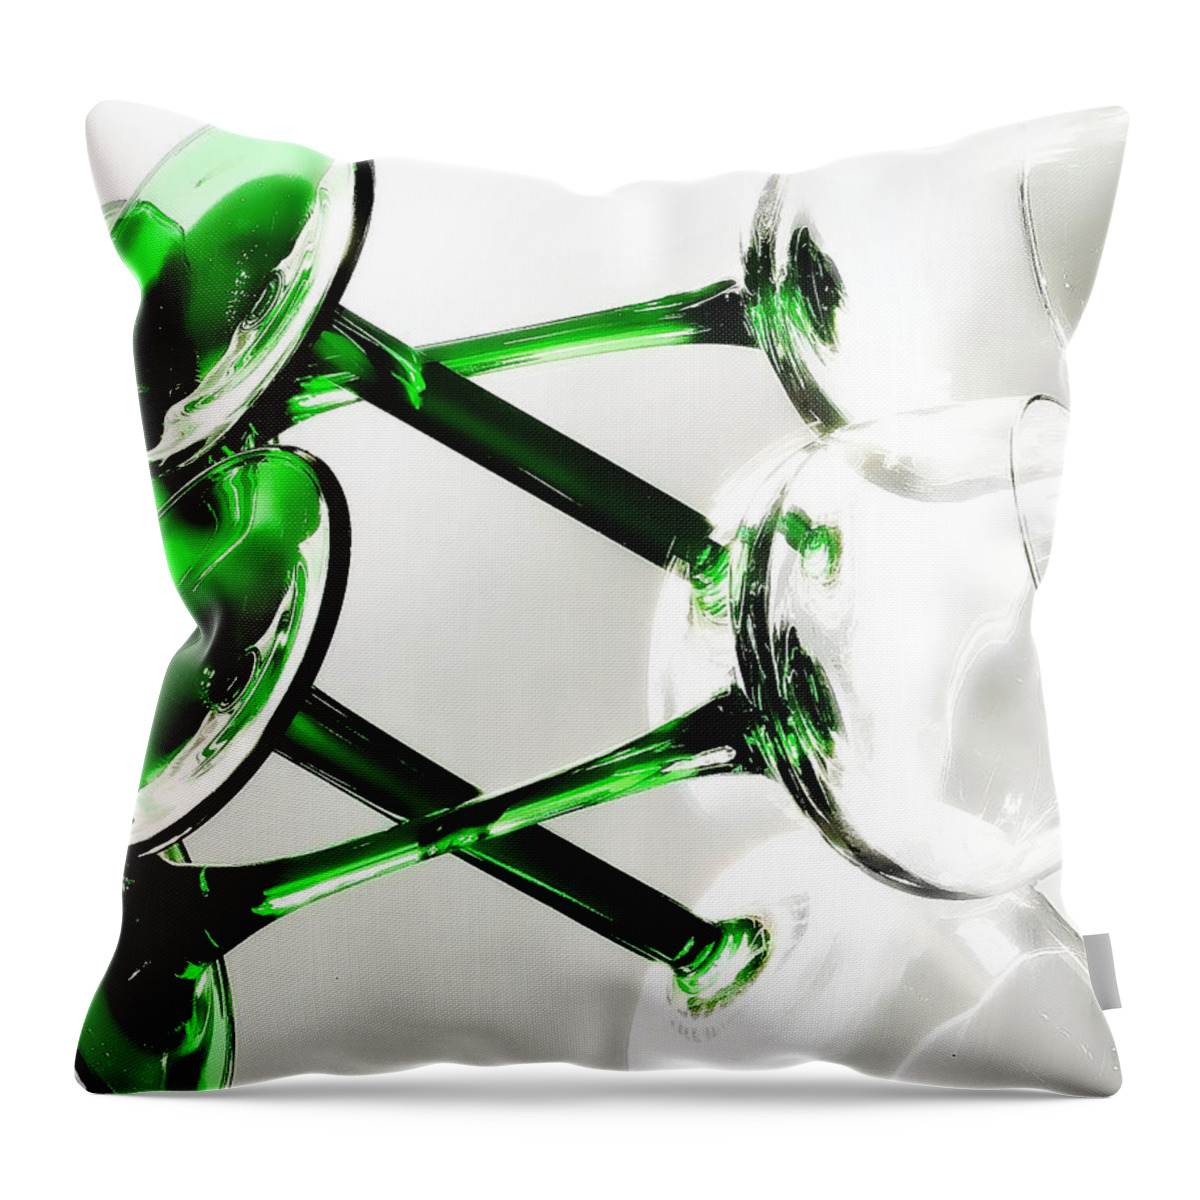 Glass Glassware Throw Pillow featuring the photograph Glass Glow by Camille Lopez